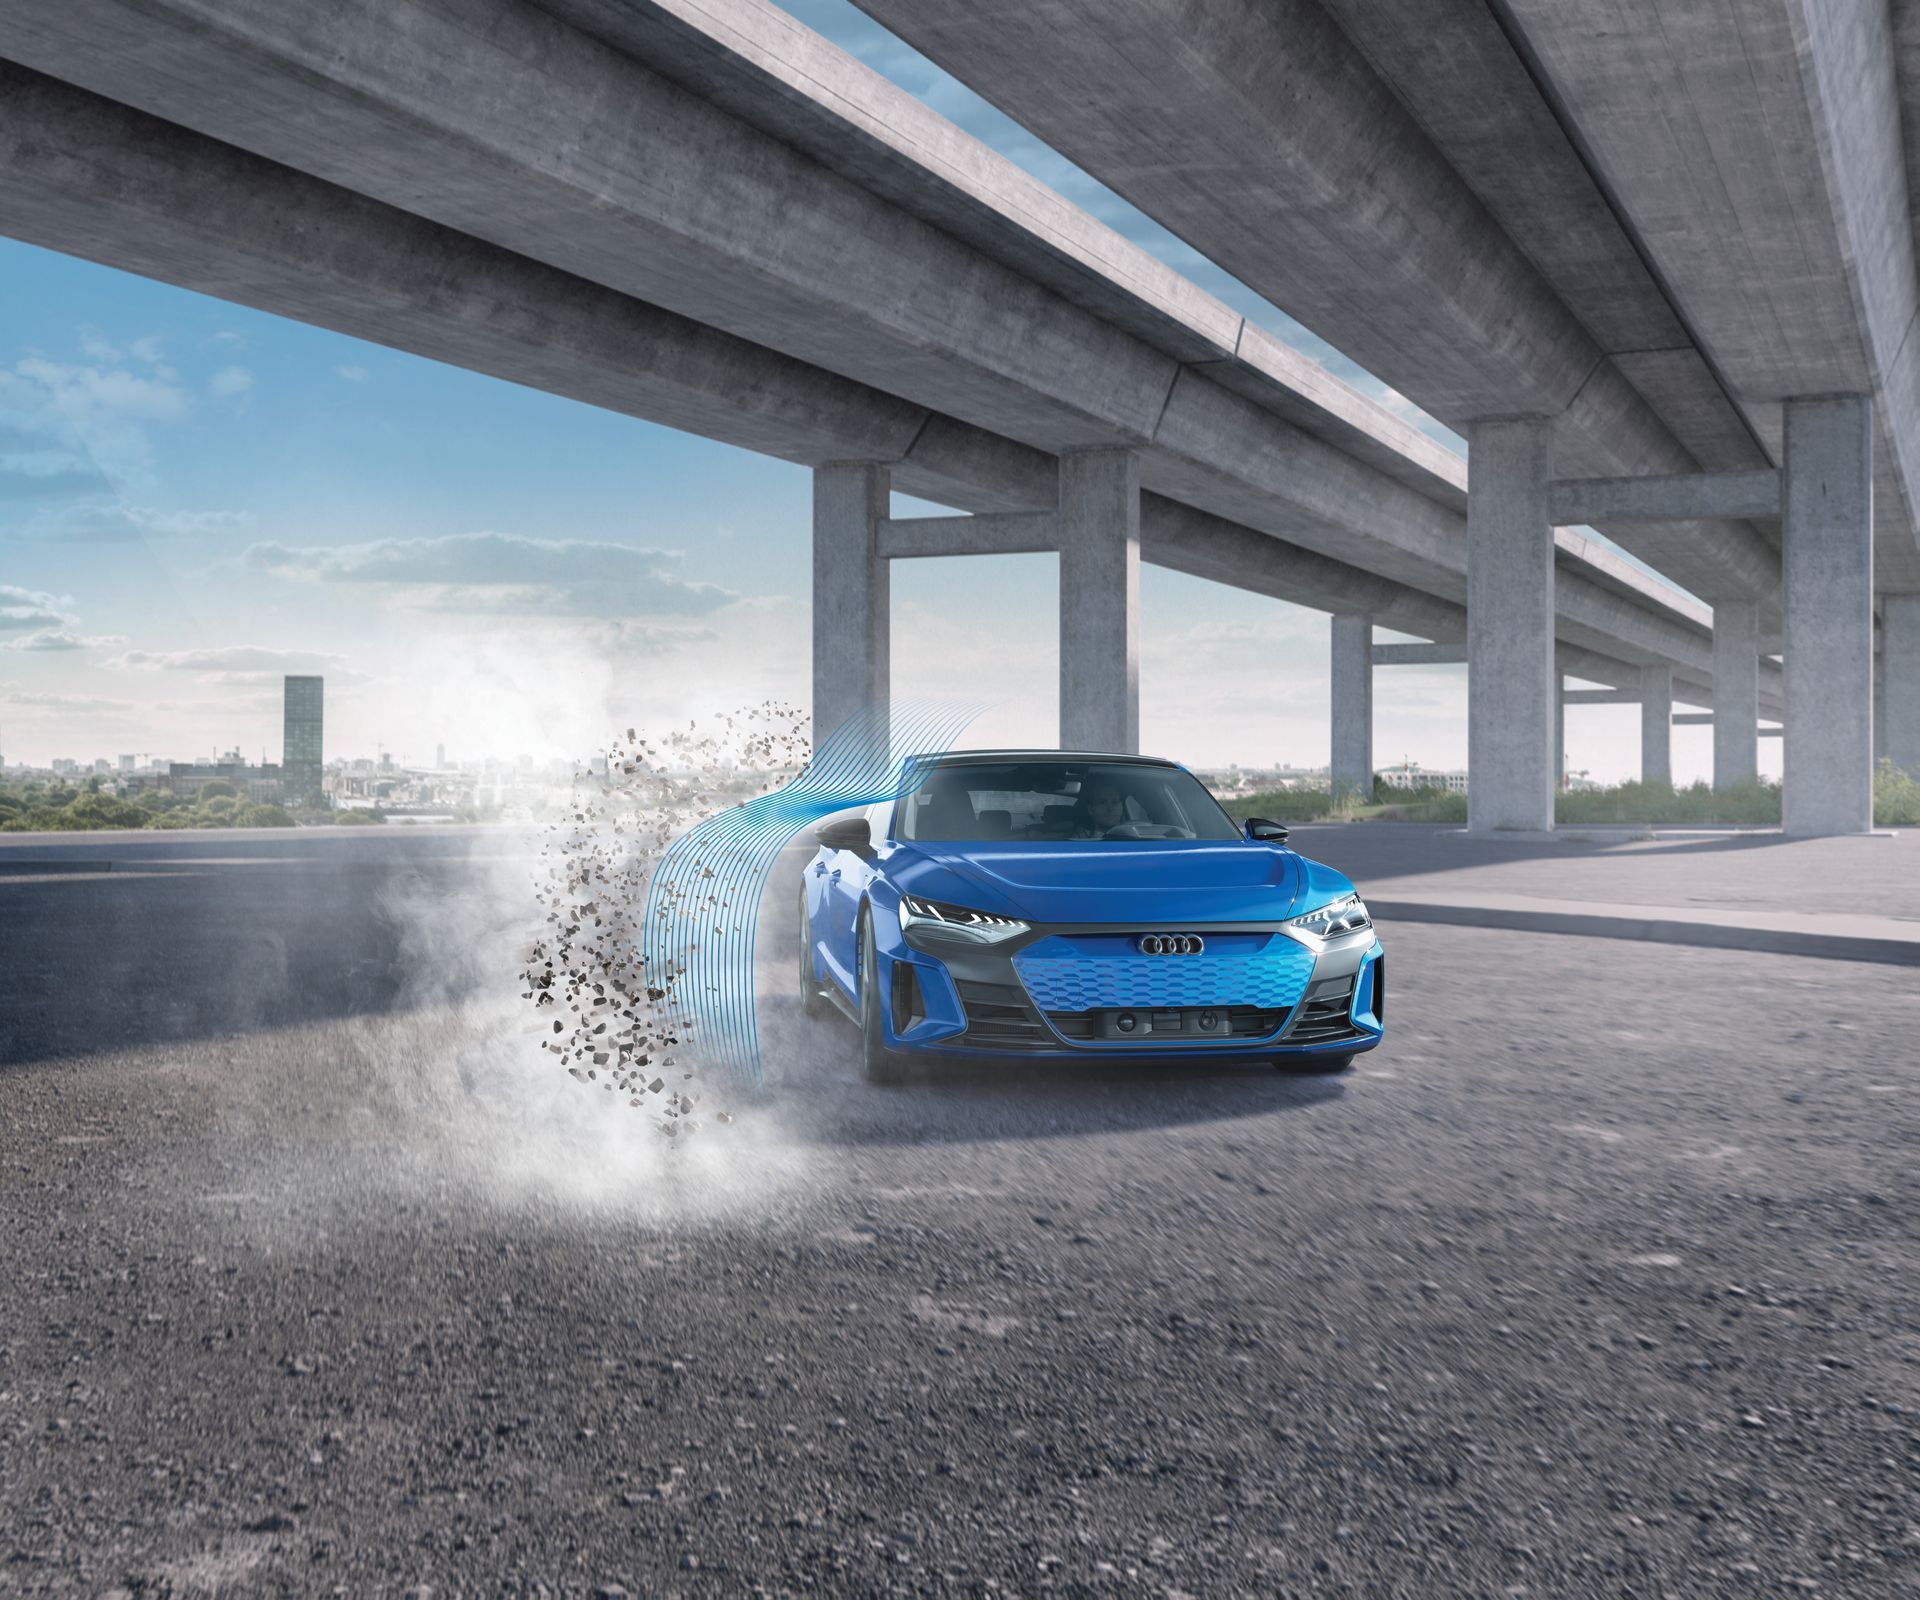 a blue sports car is parked under an underpass in a gravel parking lot